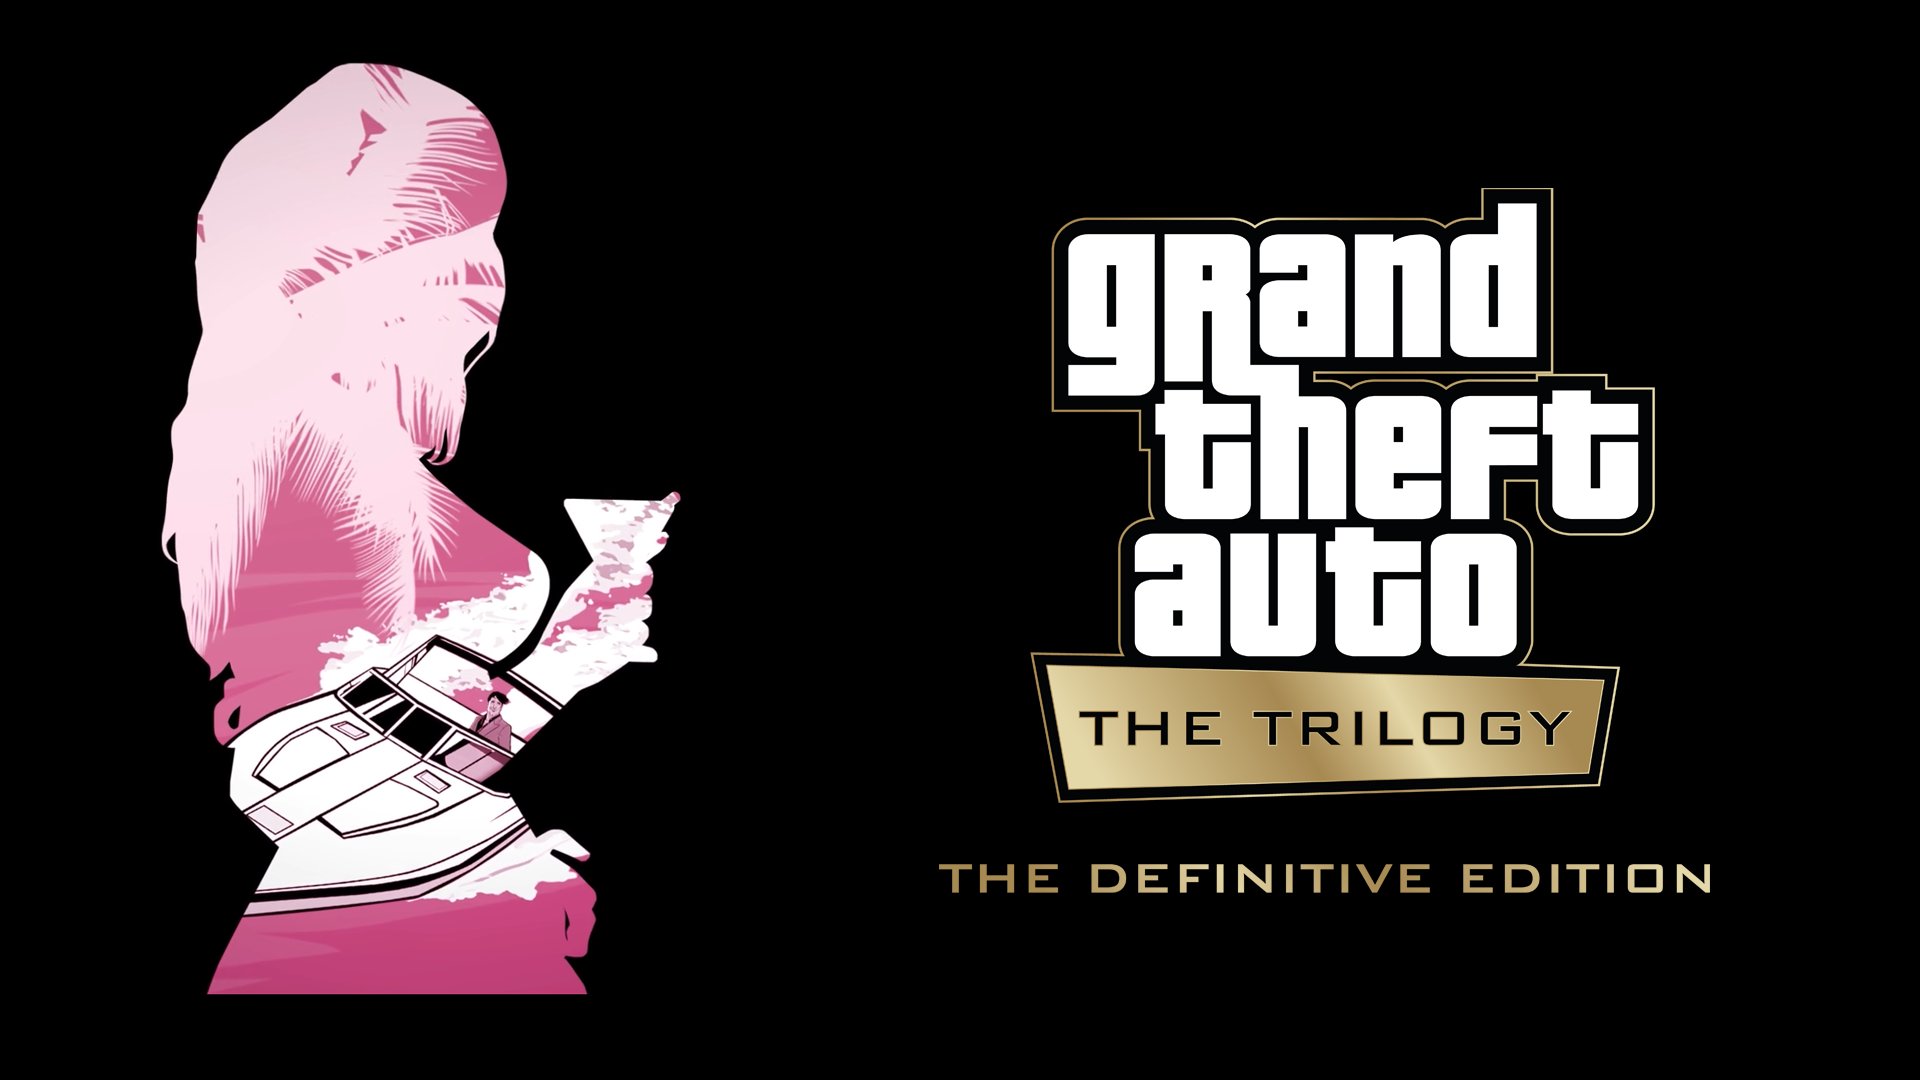 grand theft auto: vice city, video game, grand theft auto: the trilogy the definitive edition, grand theft auto